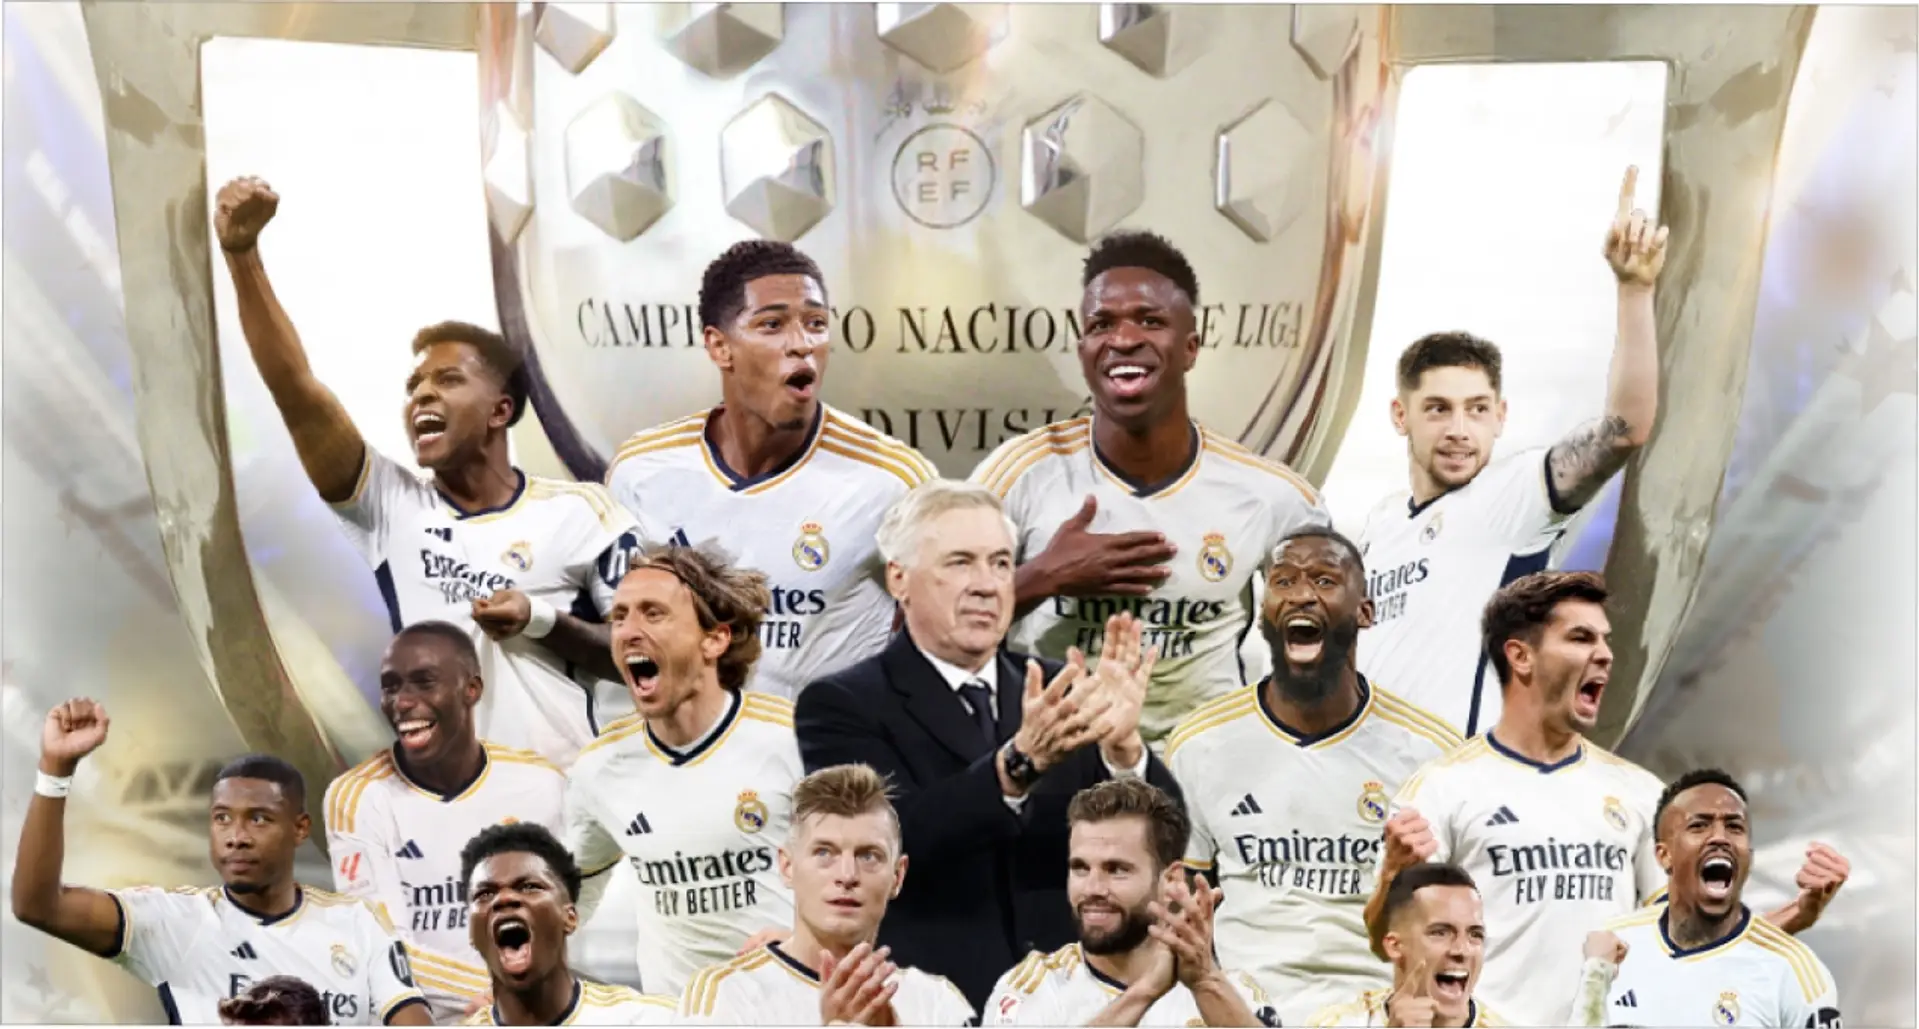 RealMadridRealMadrid is the best club team in the world🏆🏆🏆���